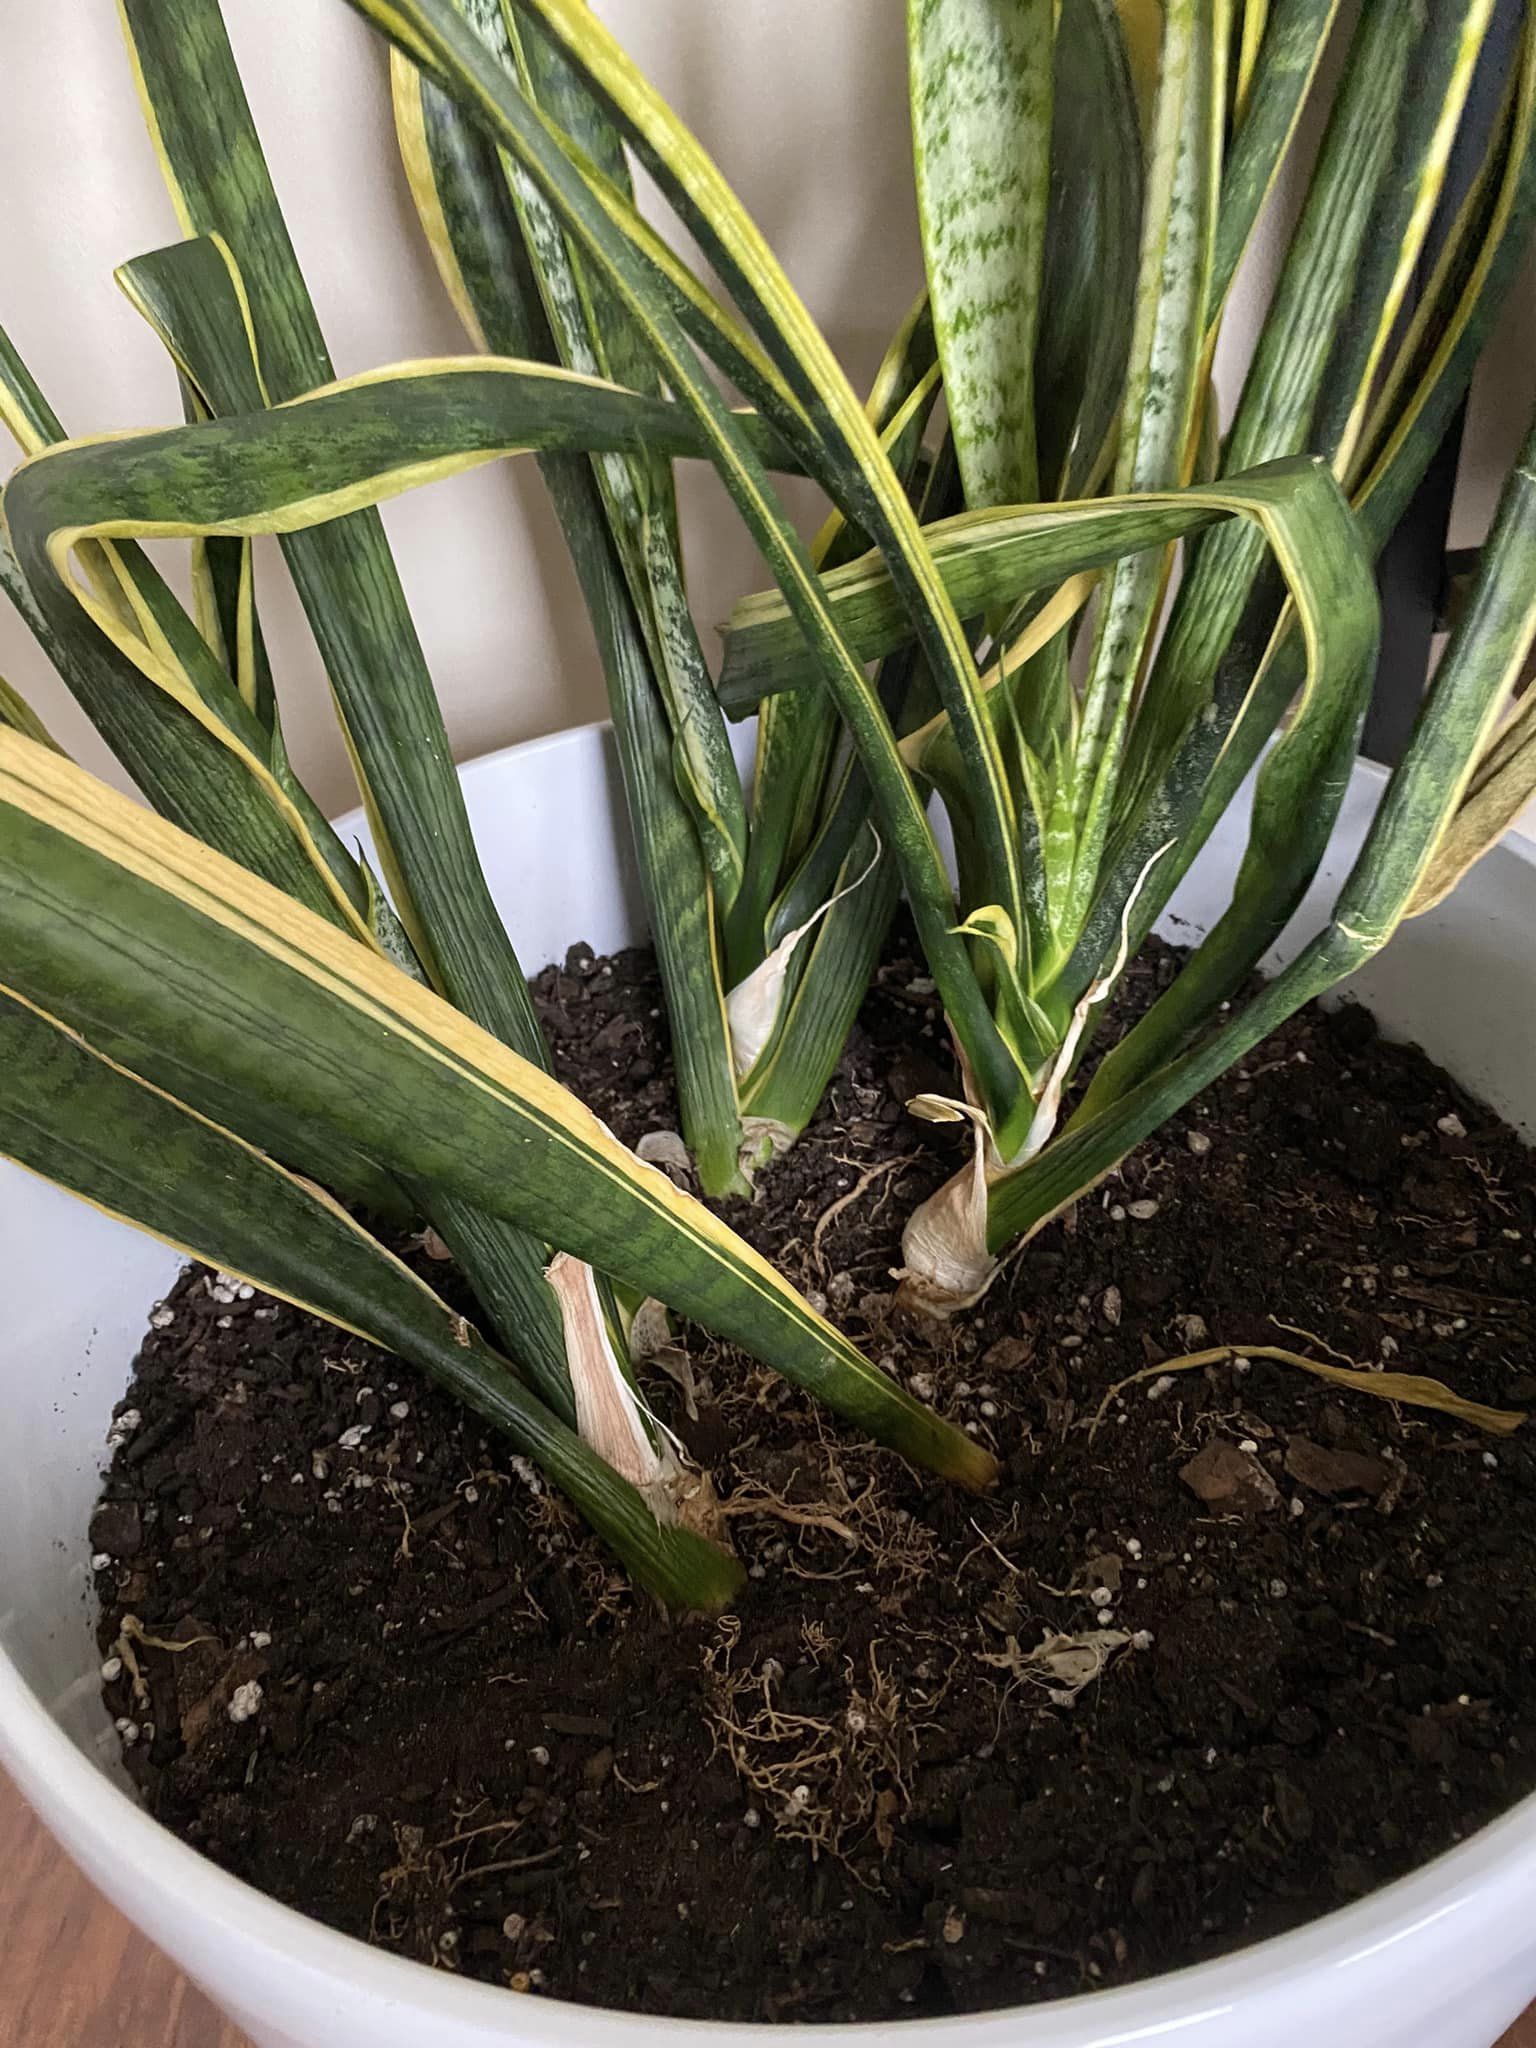 Why Is My Snake Plant Drooping?